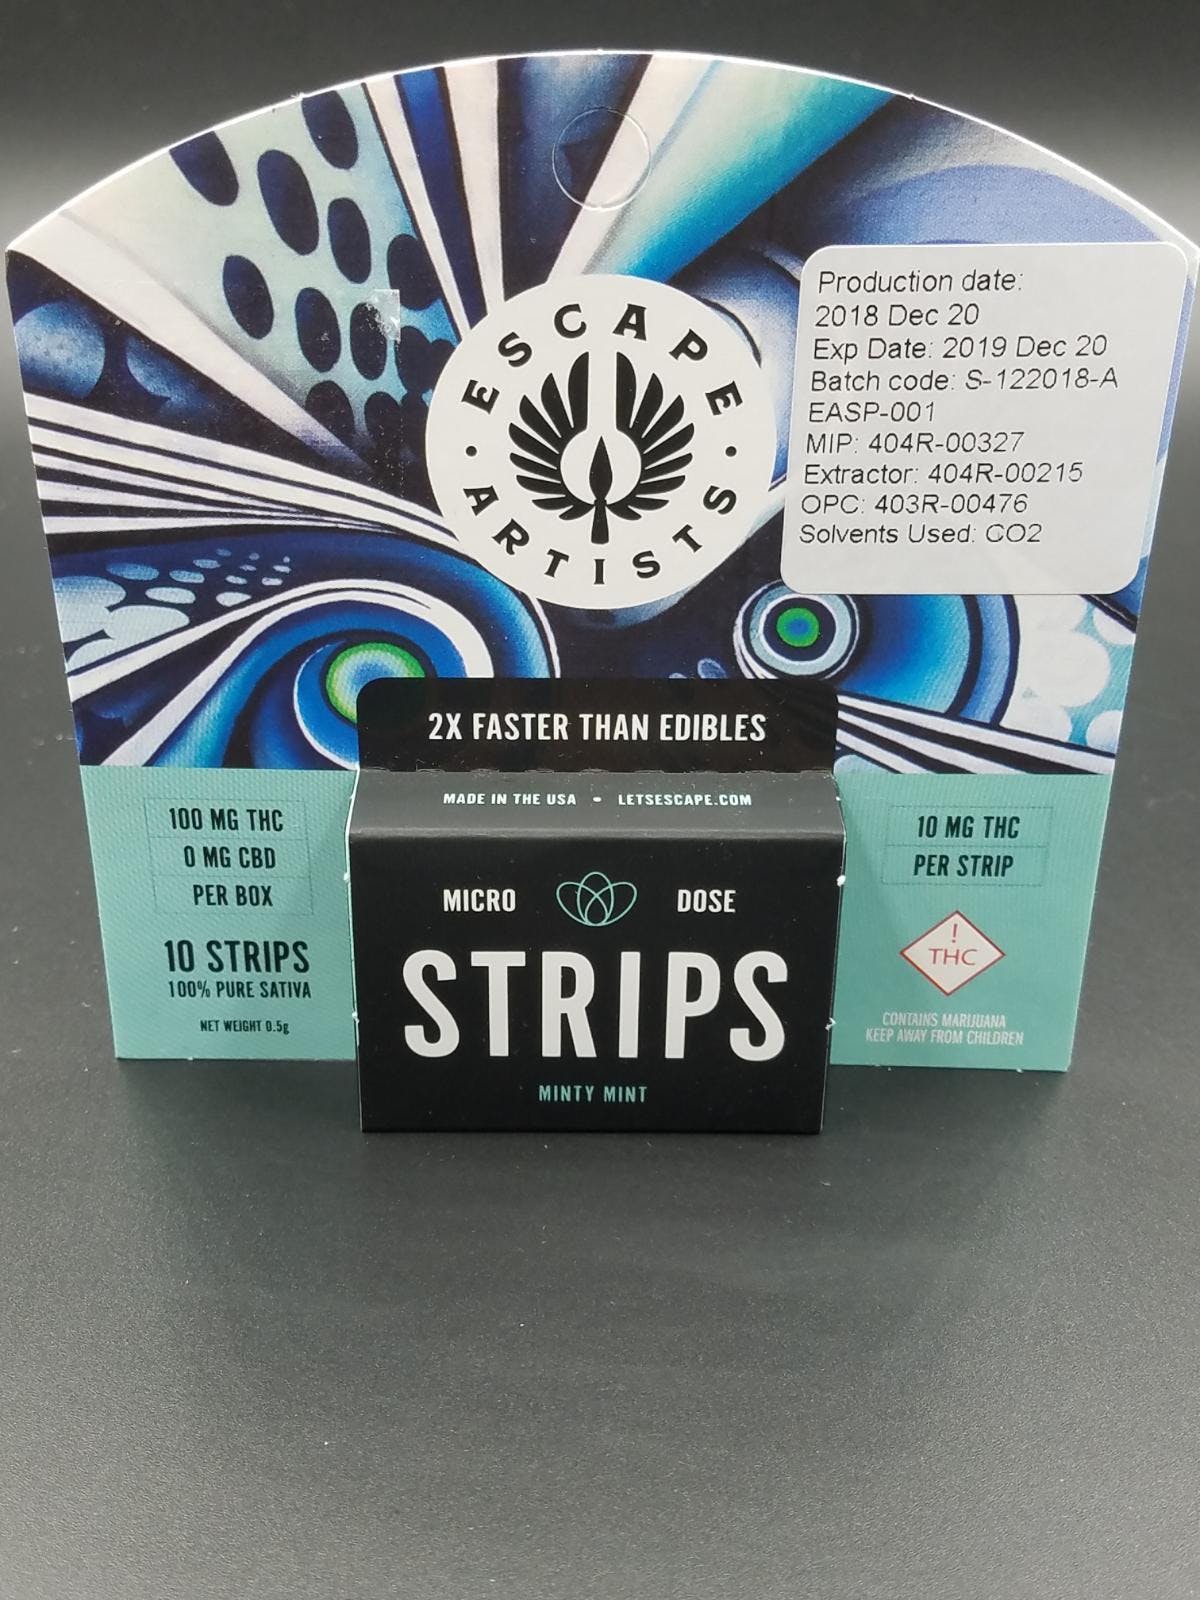 edible-escape-artists-mint-speed-strips-100mg